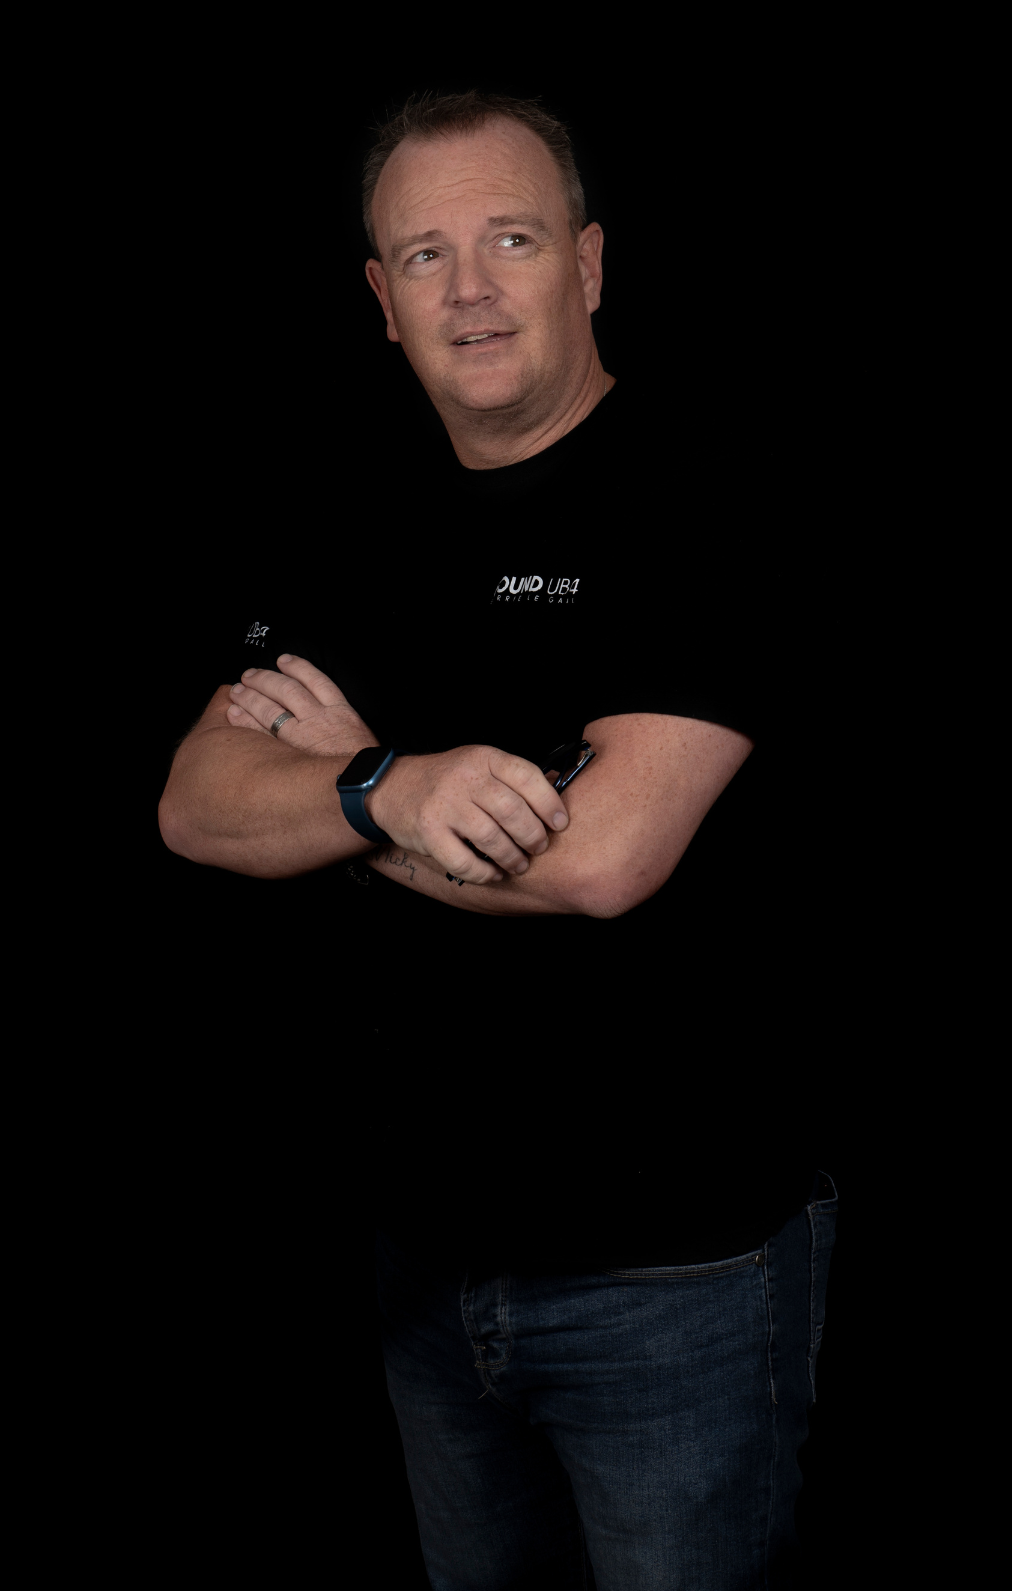 A man with crossed arms wearing a black t-shirt and jeans stands against a black background.